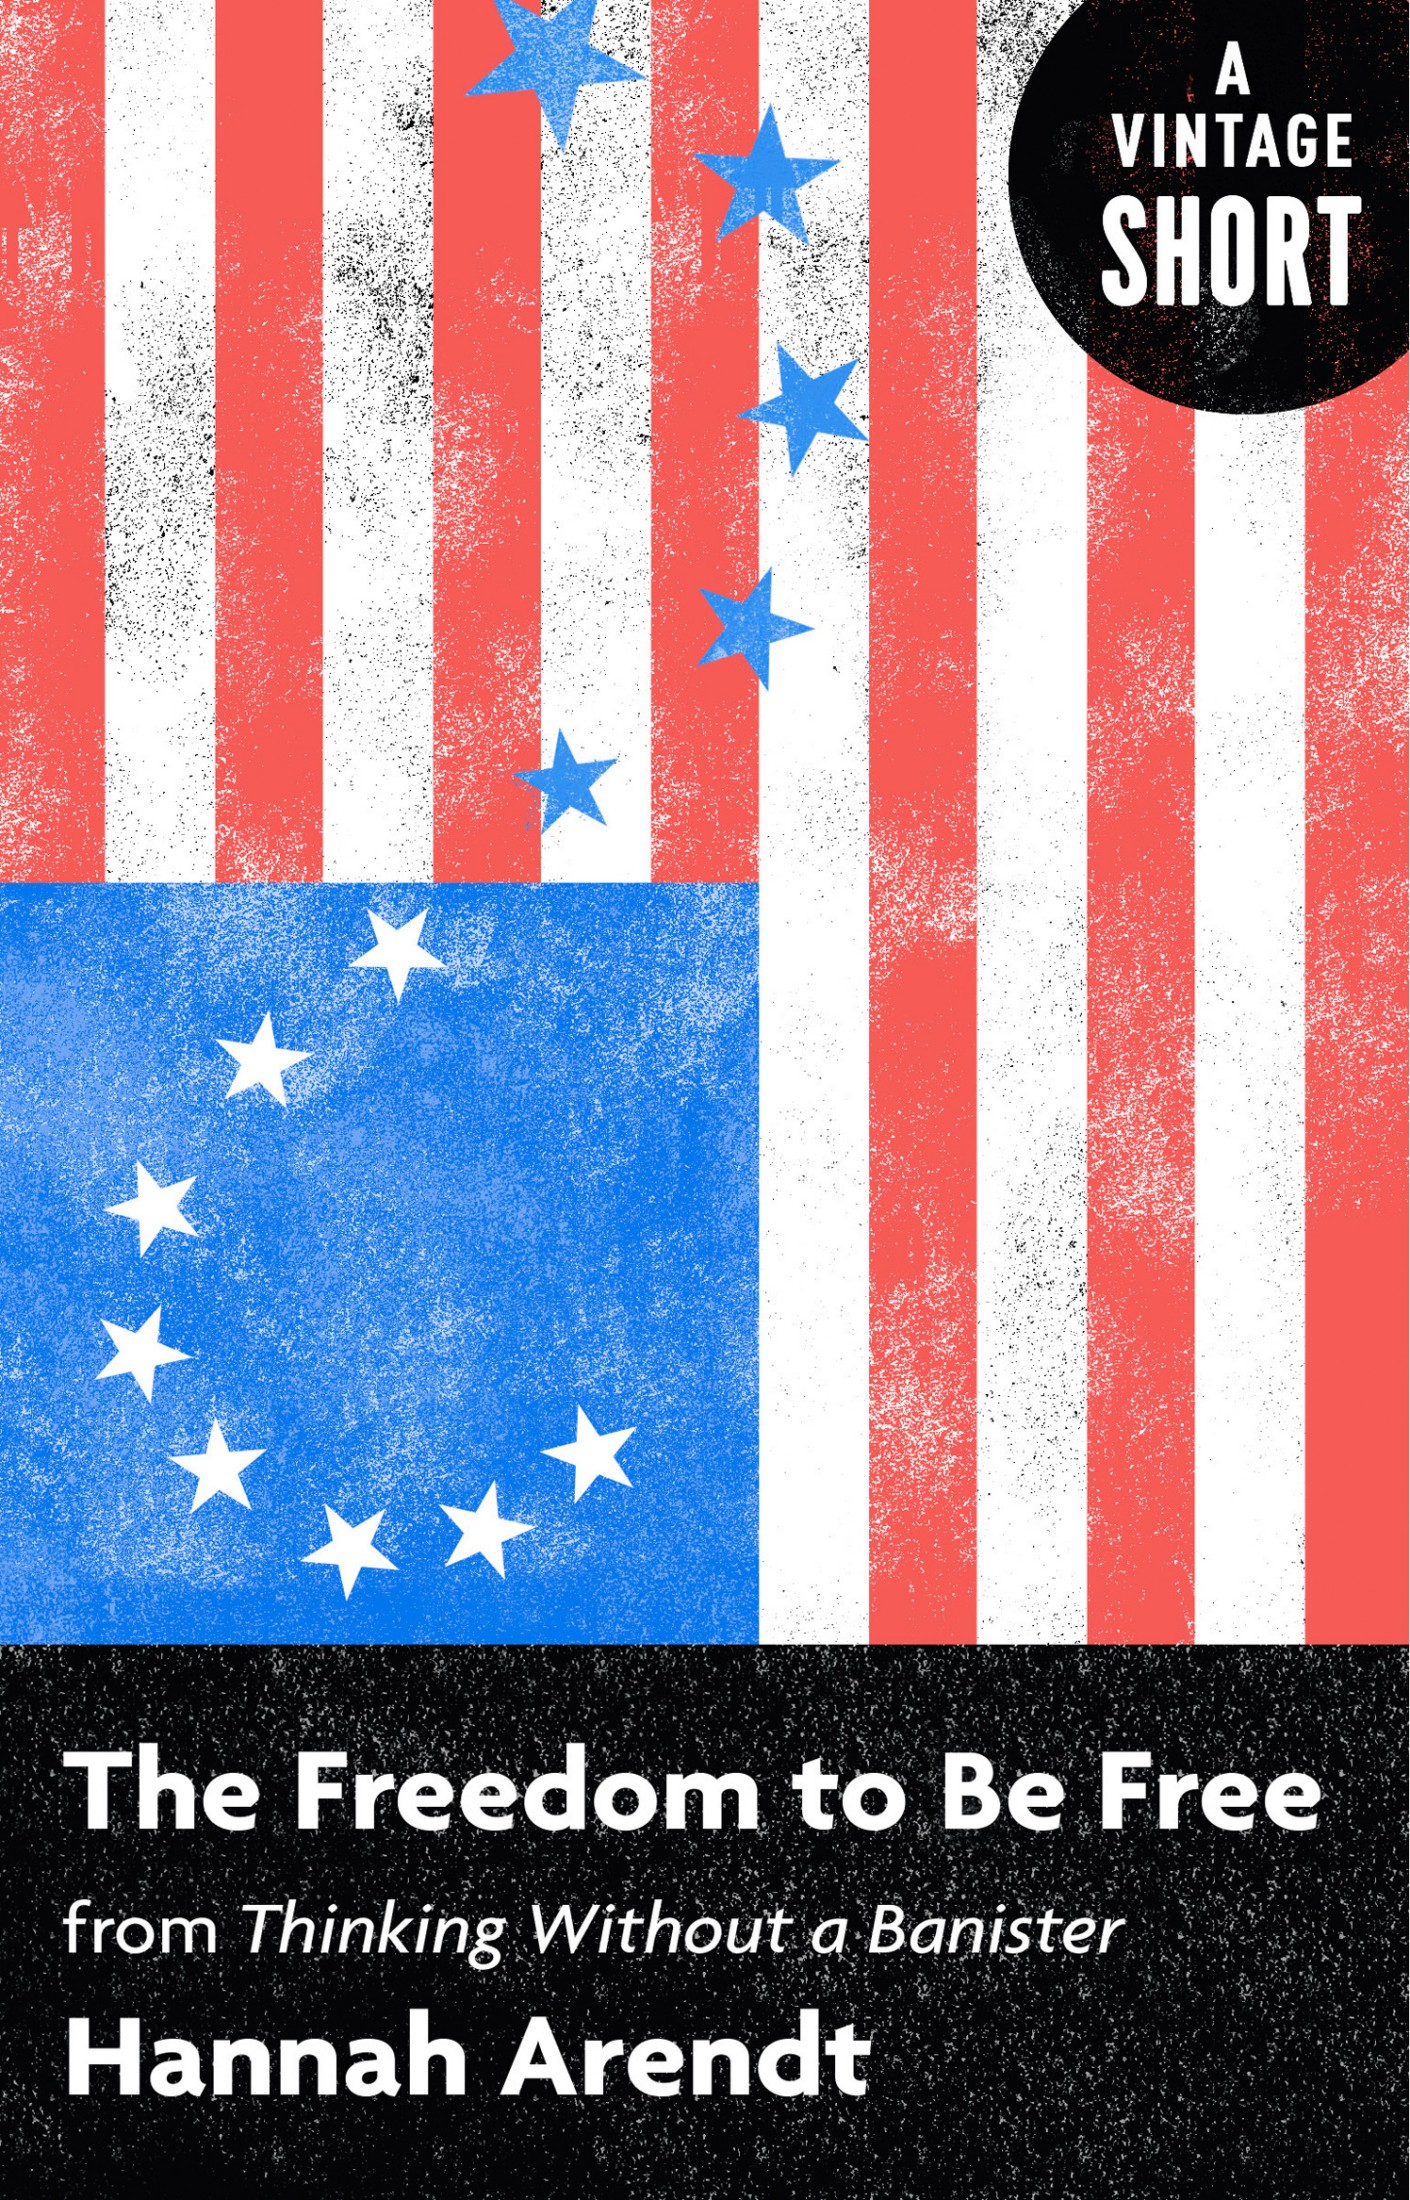 The Freedom to Be Free: From Thinking Without a Banister